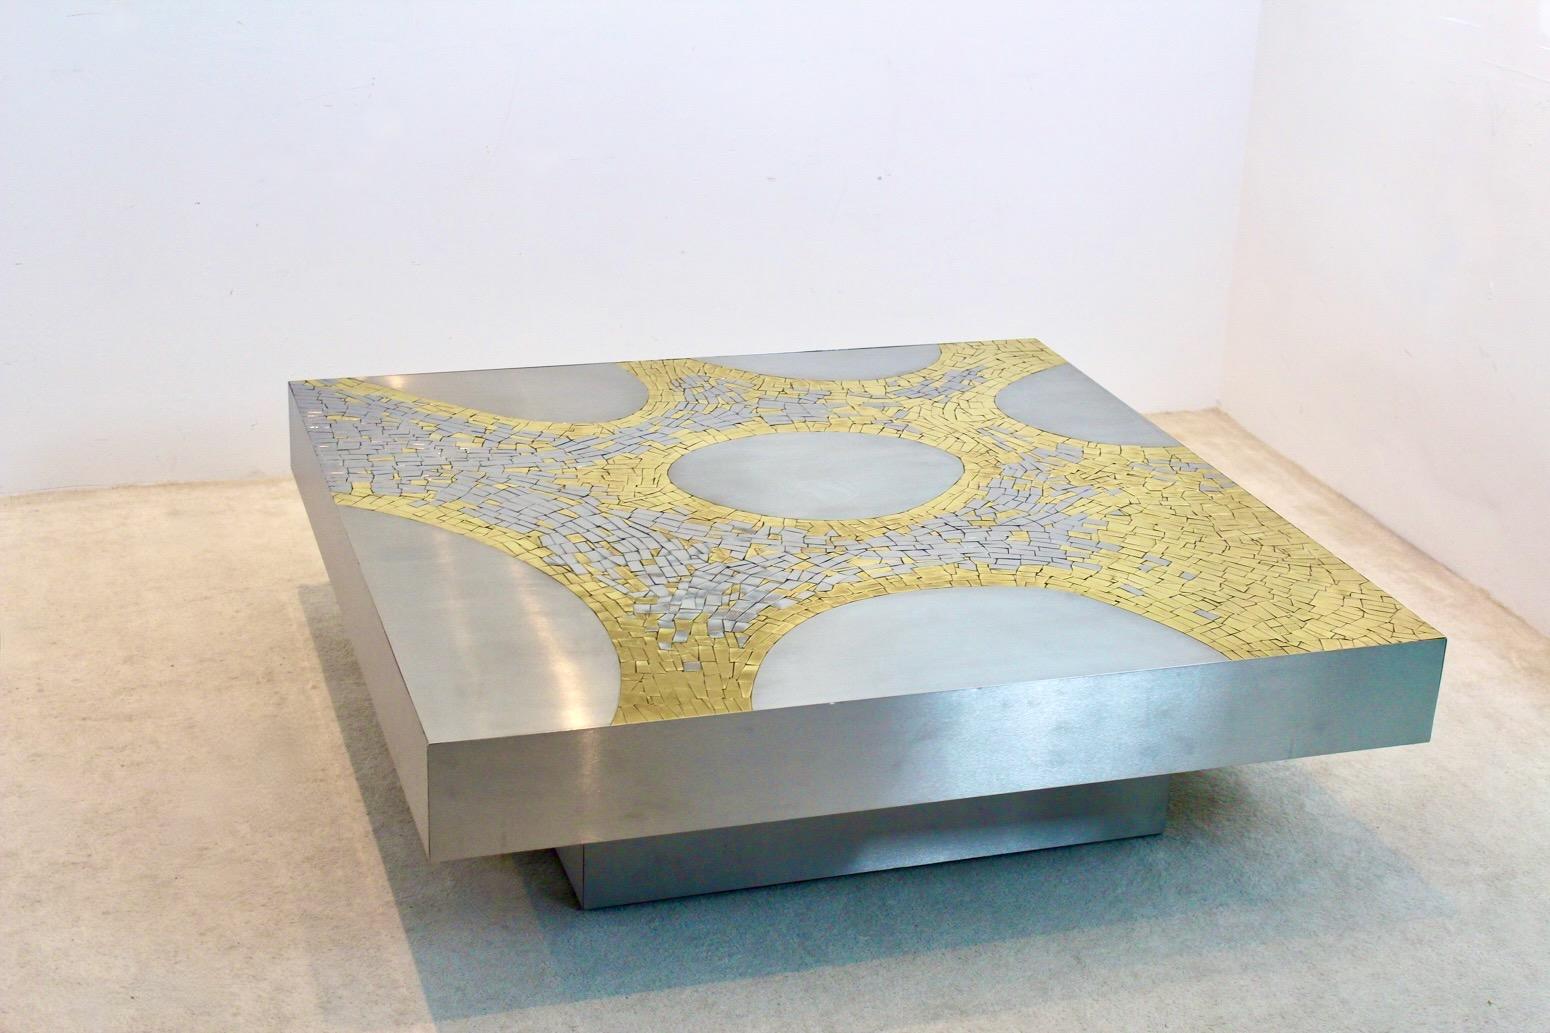 Impressive brushed stainless steel and brass square coffee table, designed and signed by Jean Claude Dresse, Belgium, circa 1970. An extraordinary piece, crafted with great eye for proportions and detail, typical for the work of Dresse. The